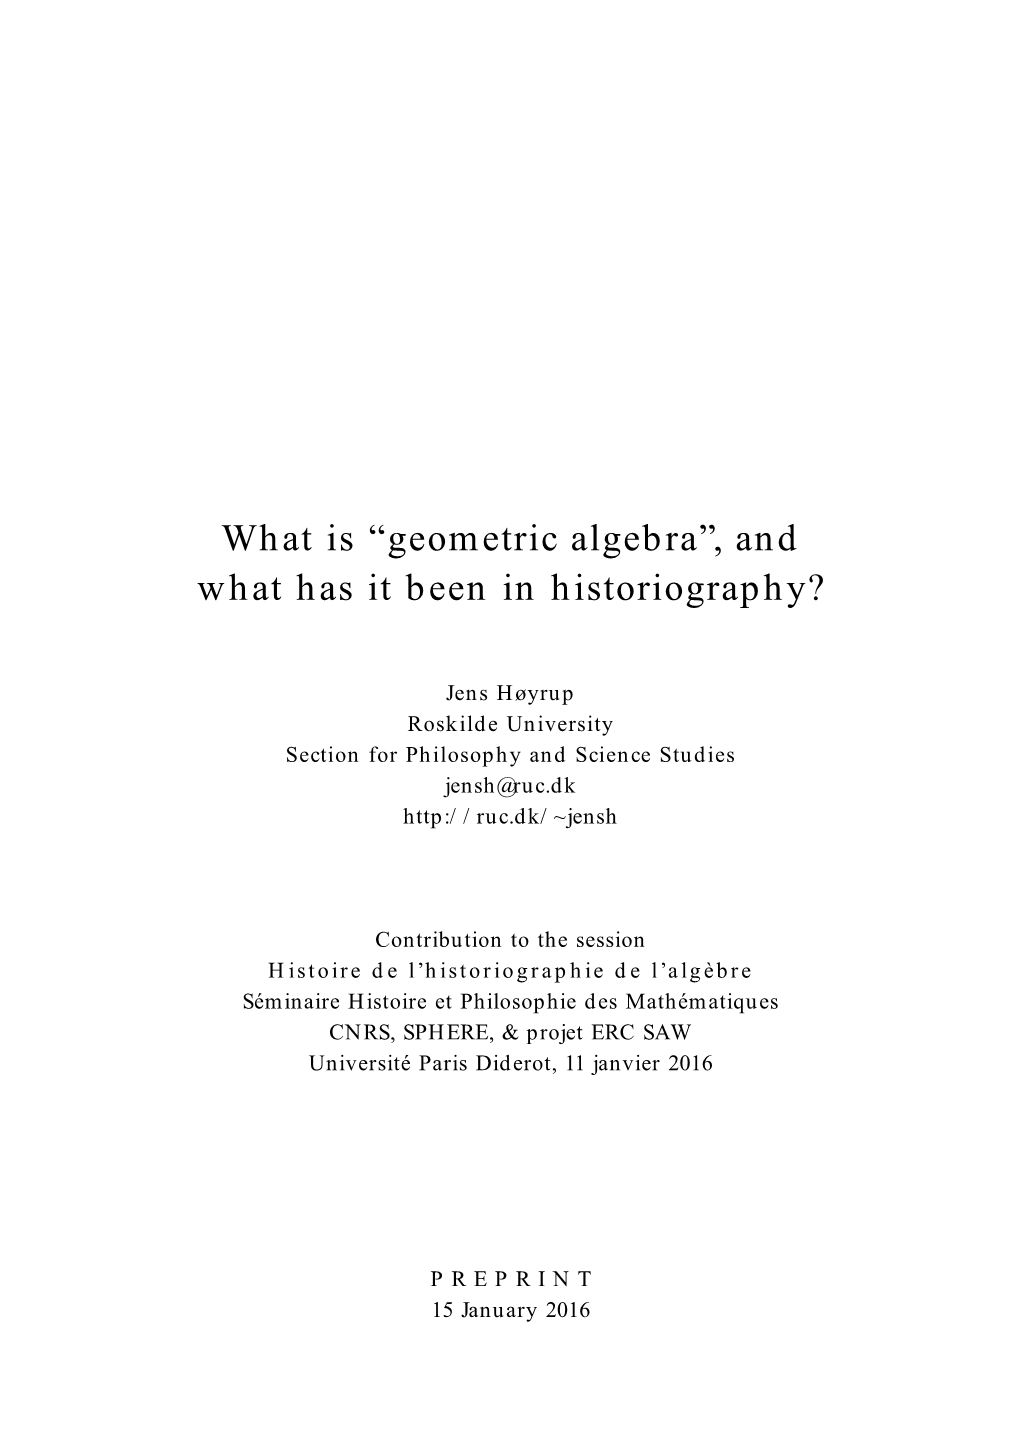 What Is “Geometric Algebra”, and What Has It Been in Historiography?